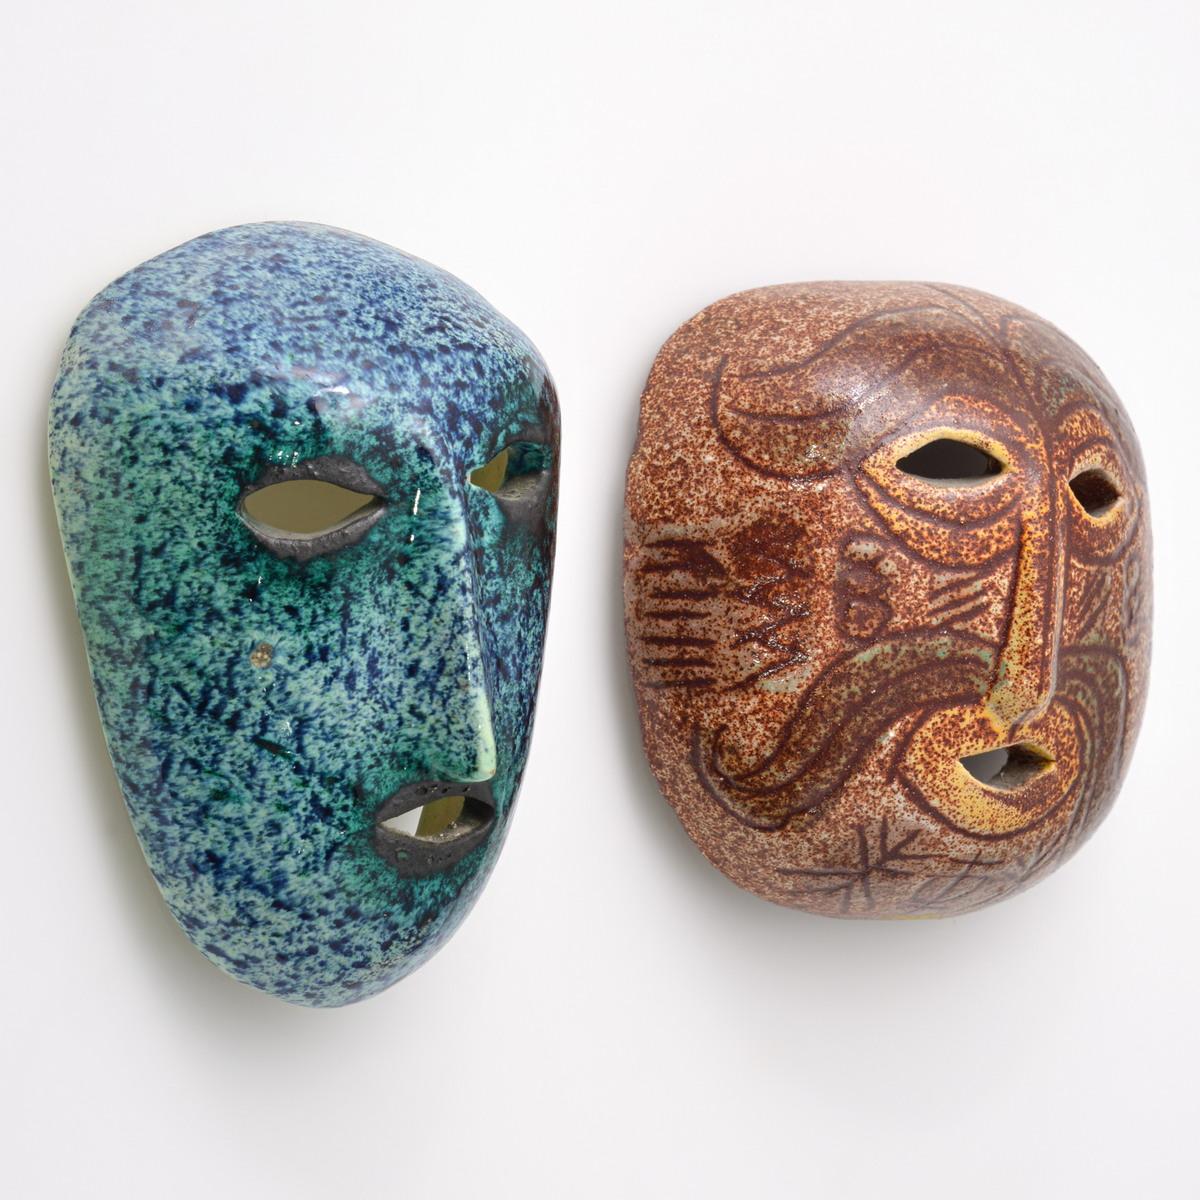 2 Slavic Paley for Accolay Pottery Masks - Sculpture by Unknown